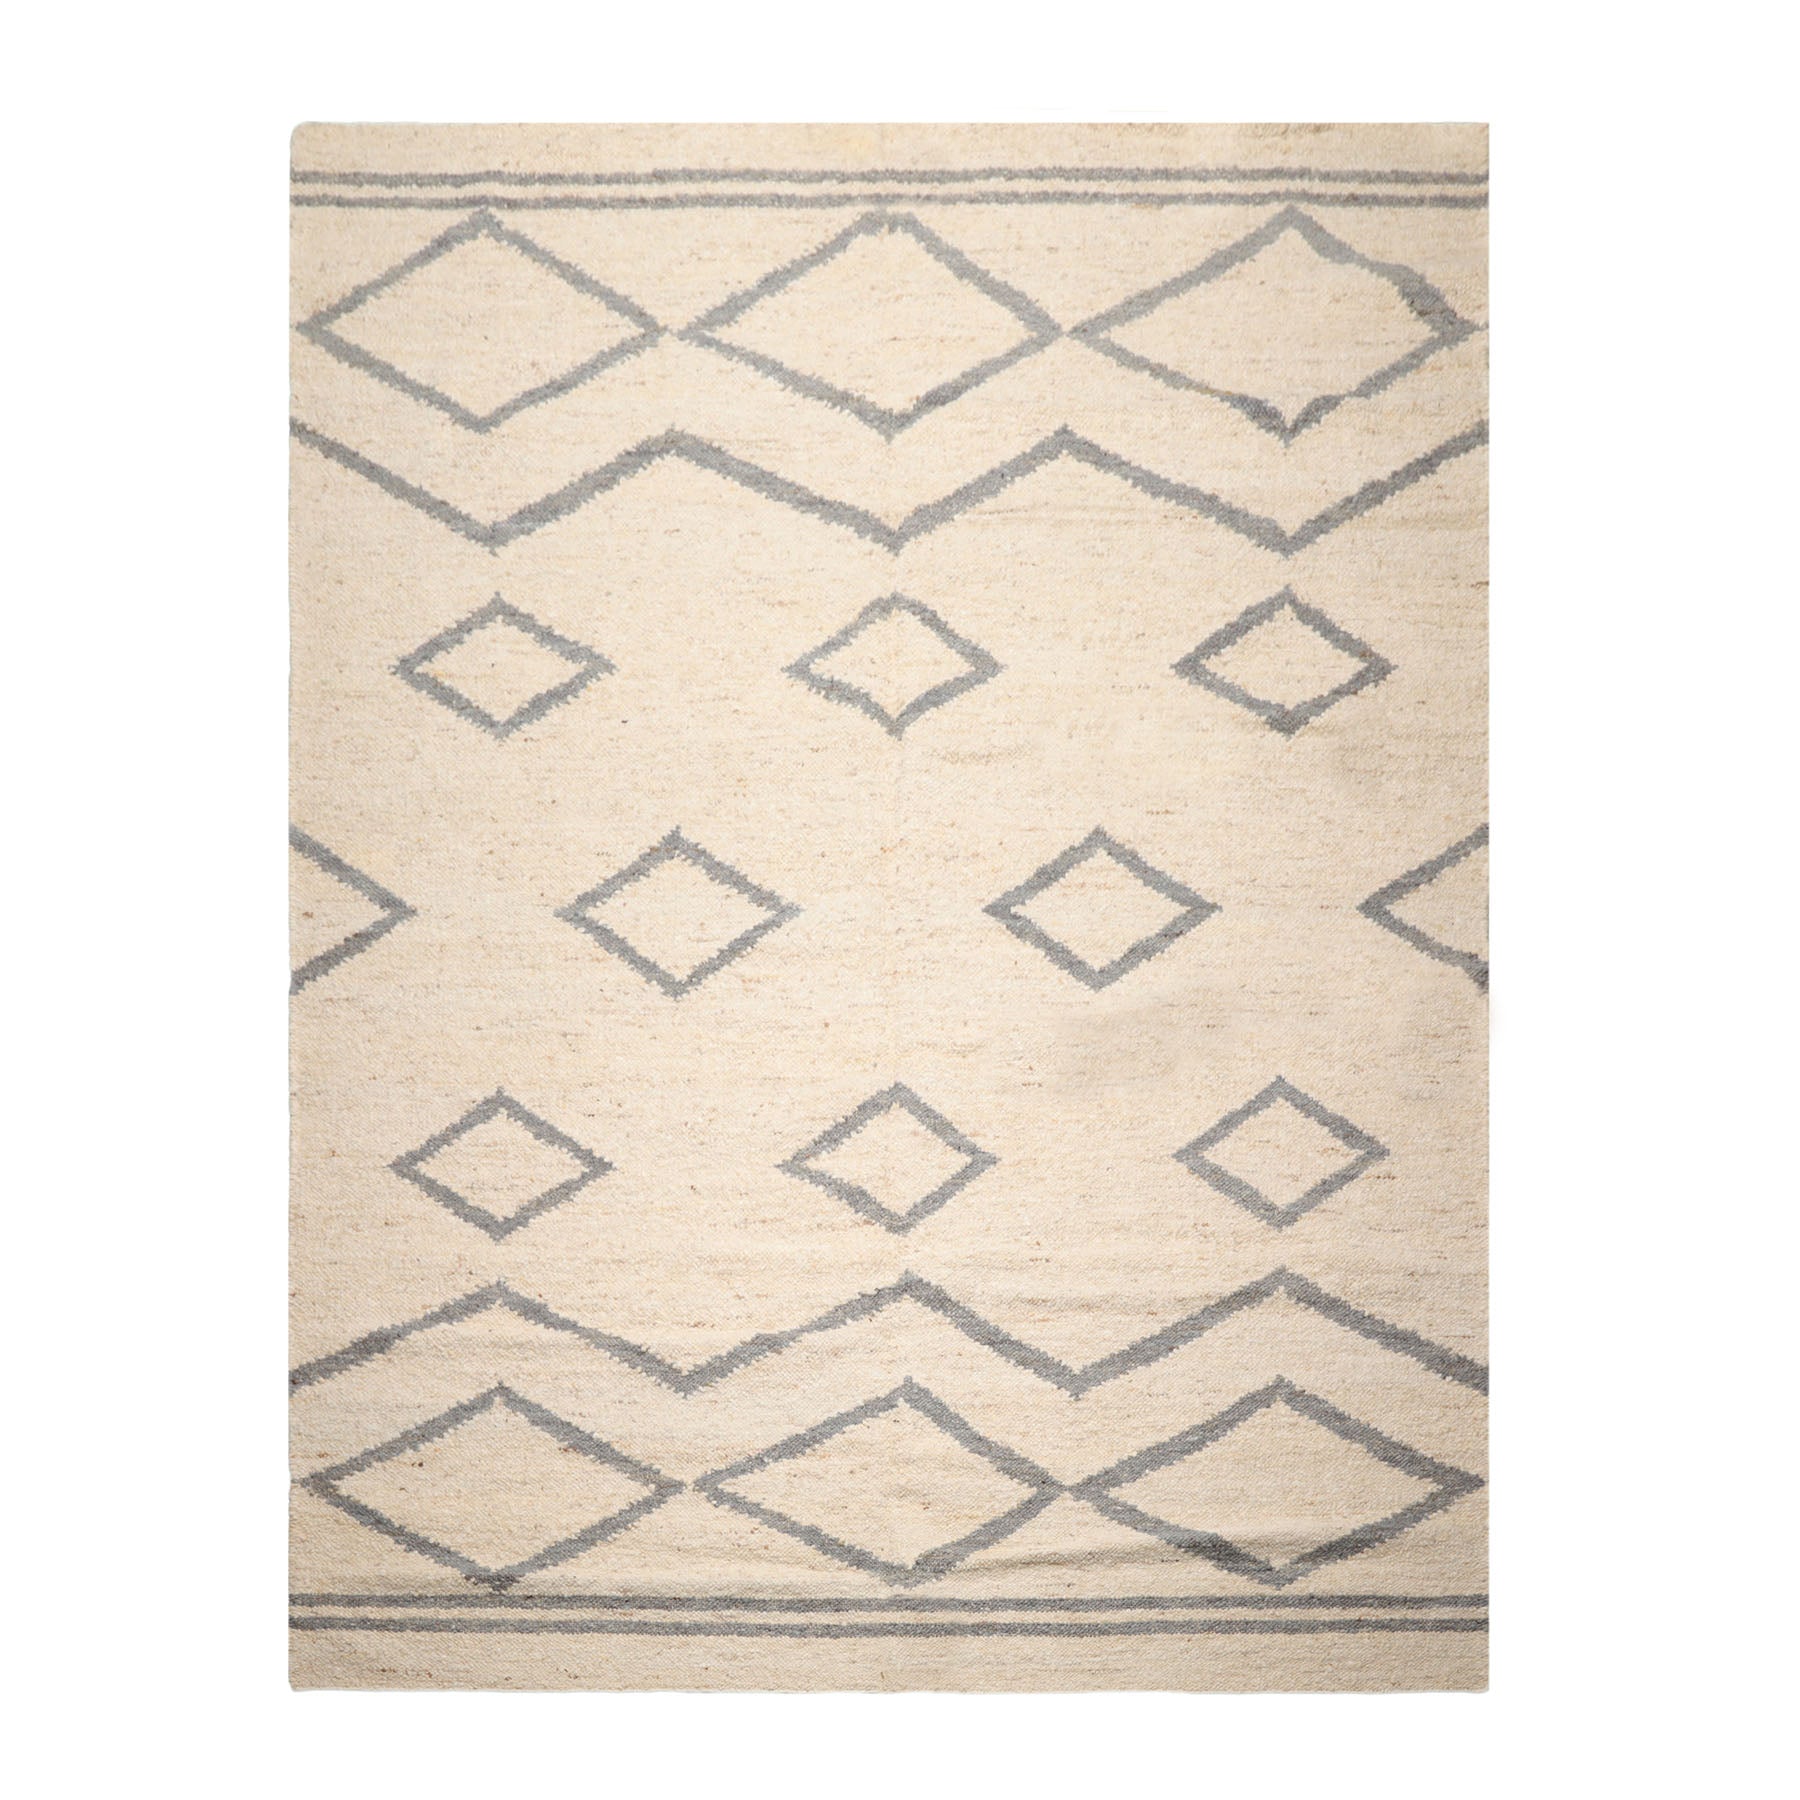 LoomBloom 9x12 Hand Woven Beige Wool Oriental Area Rug with Contemporary Geometric Design